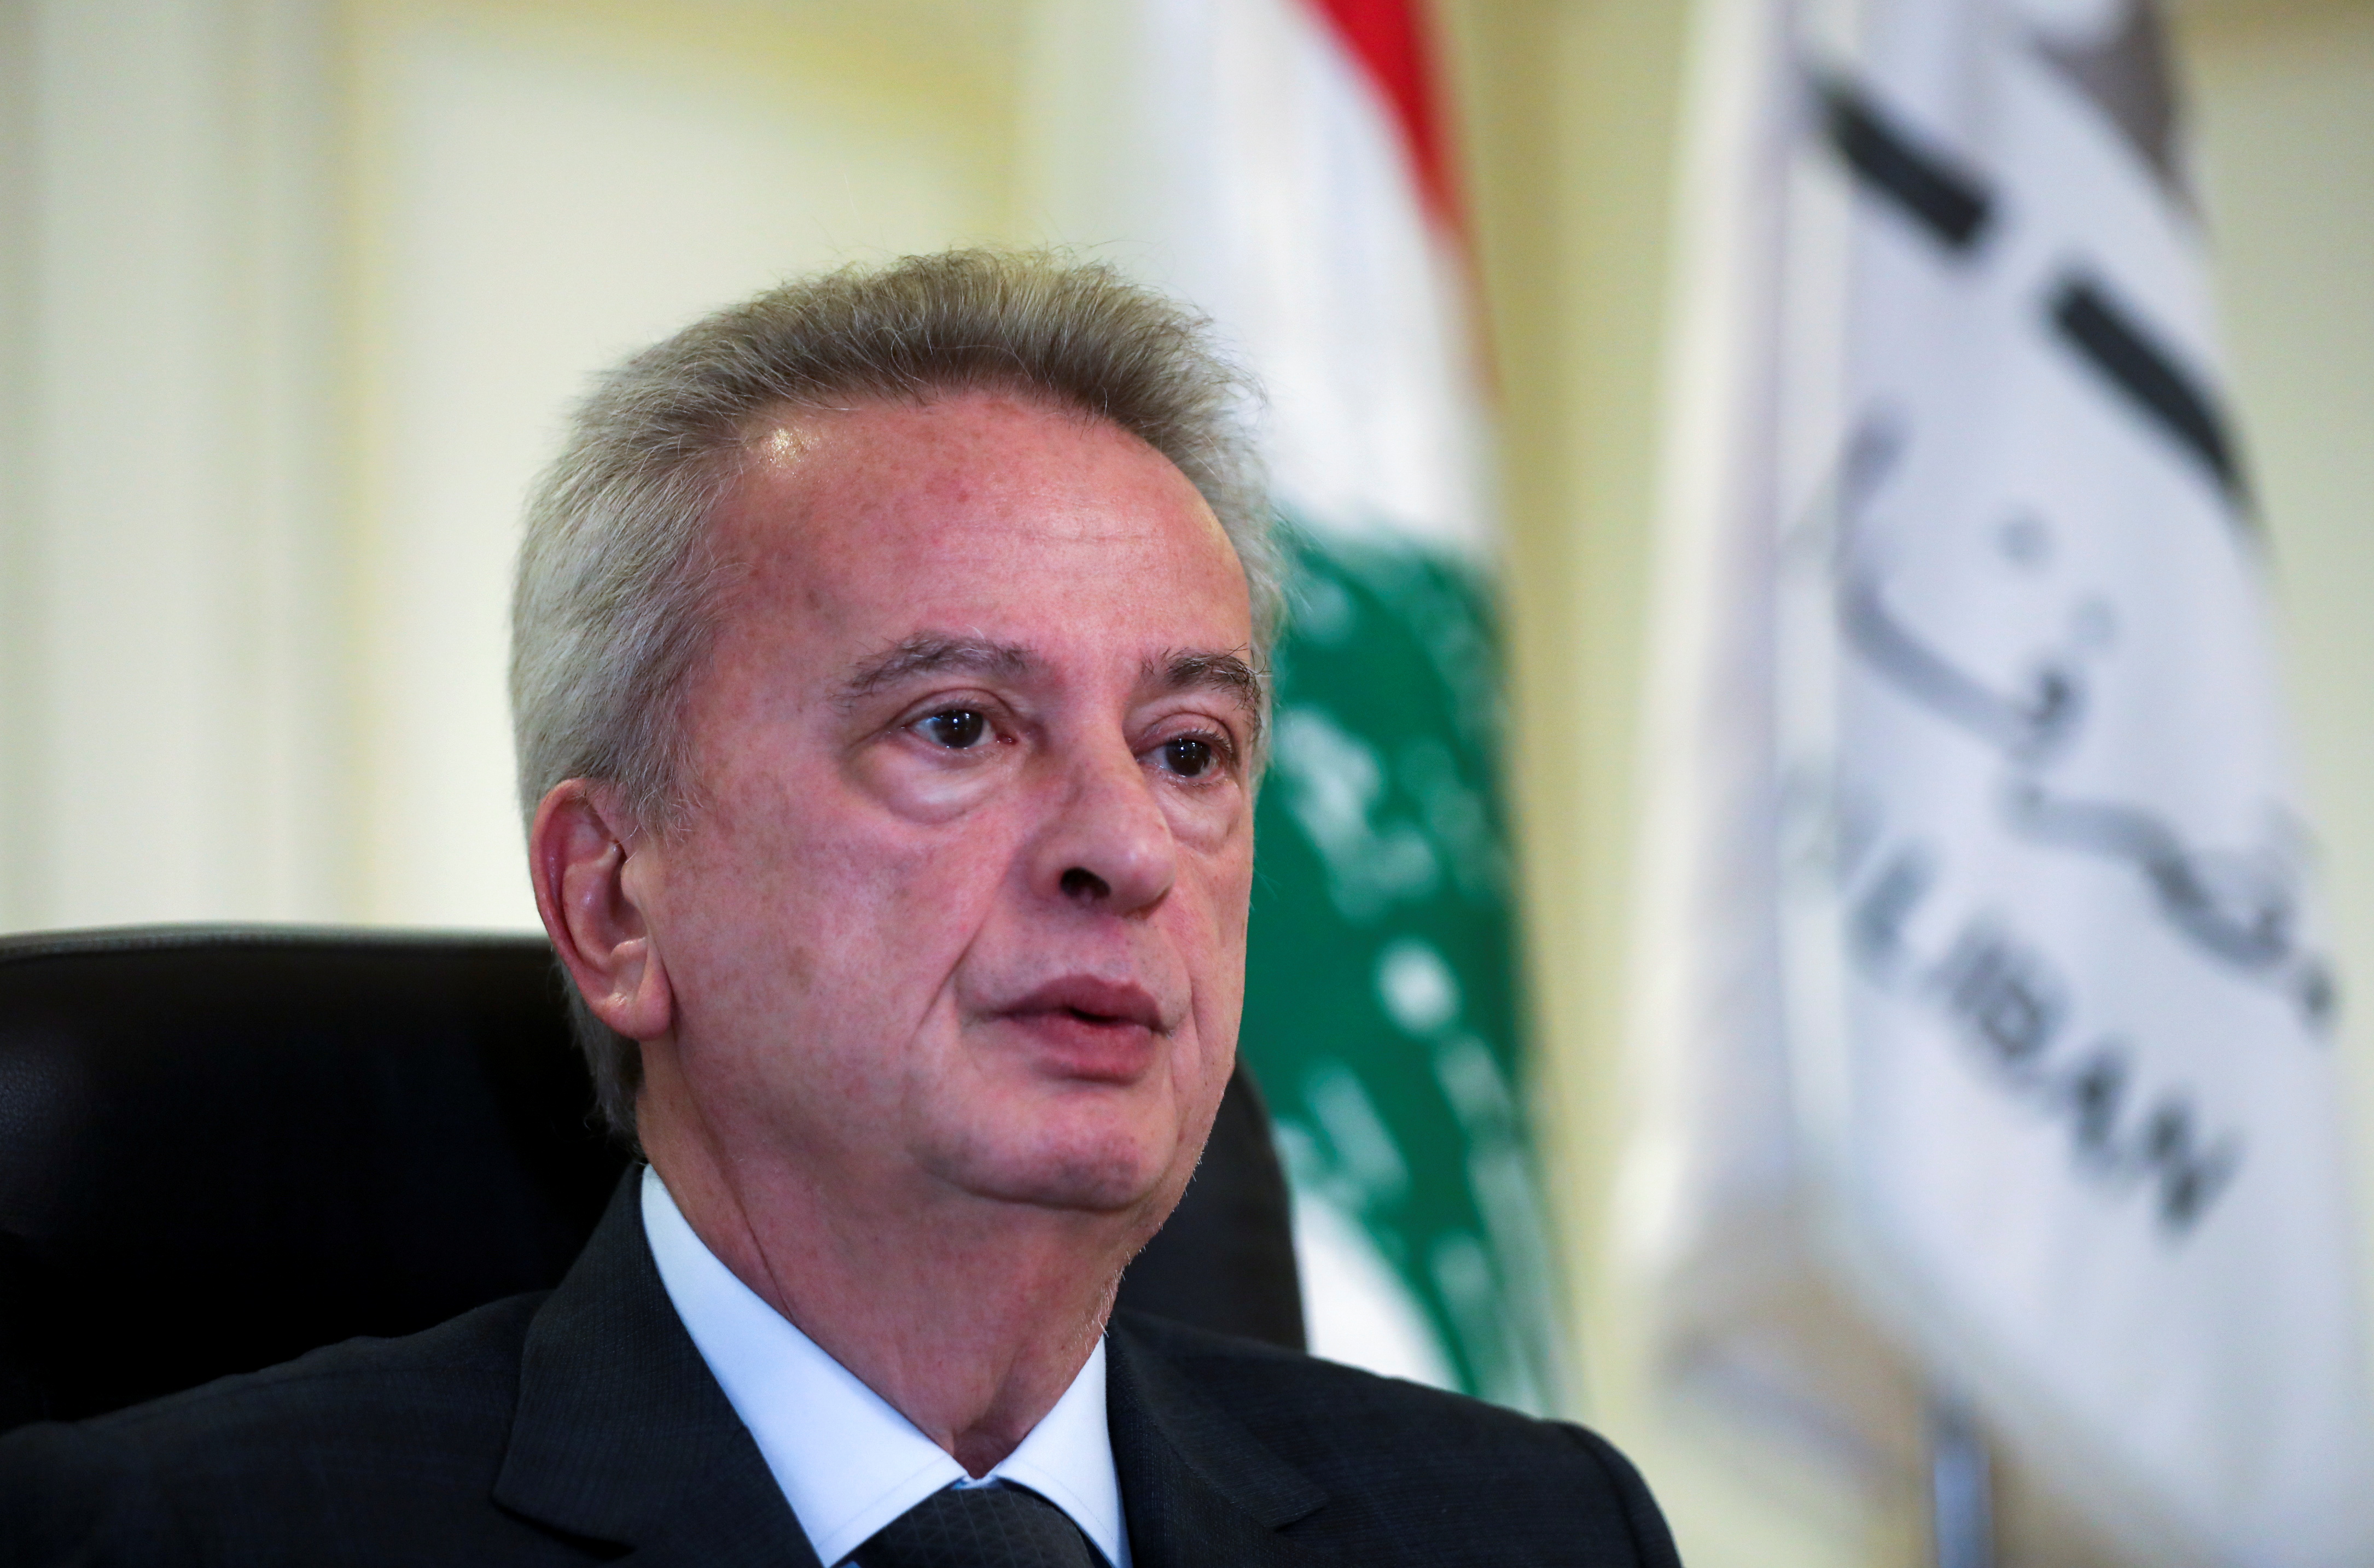 Lebanon's Central Bank Governor Riad Salameh speaks during an interview in Beirut